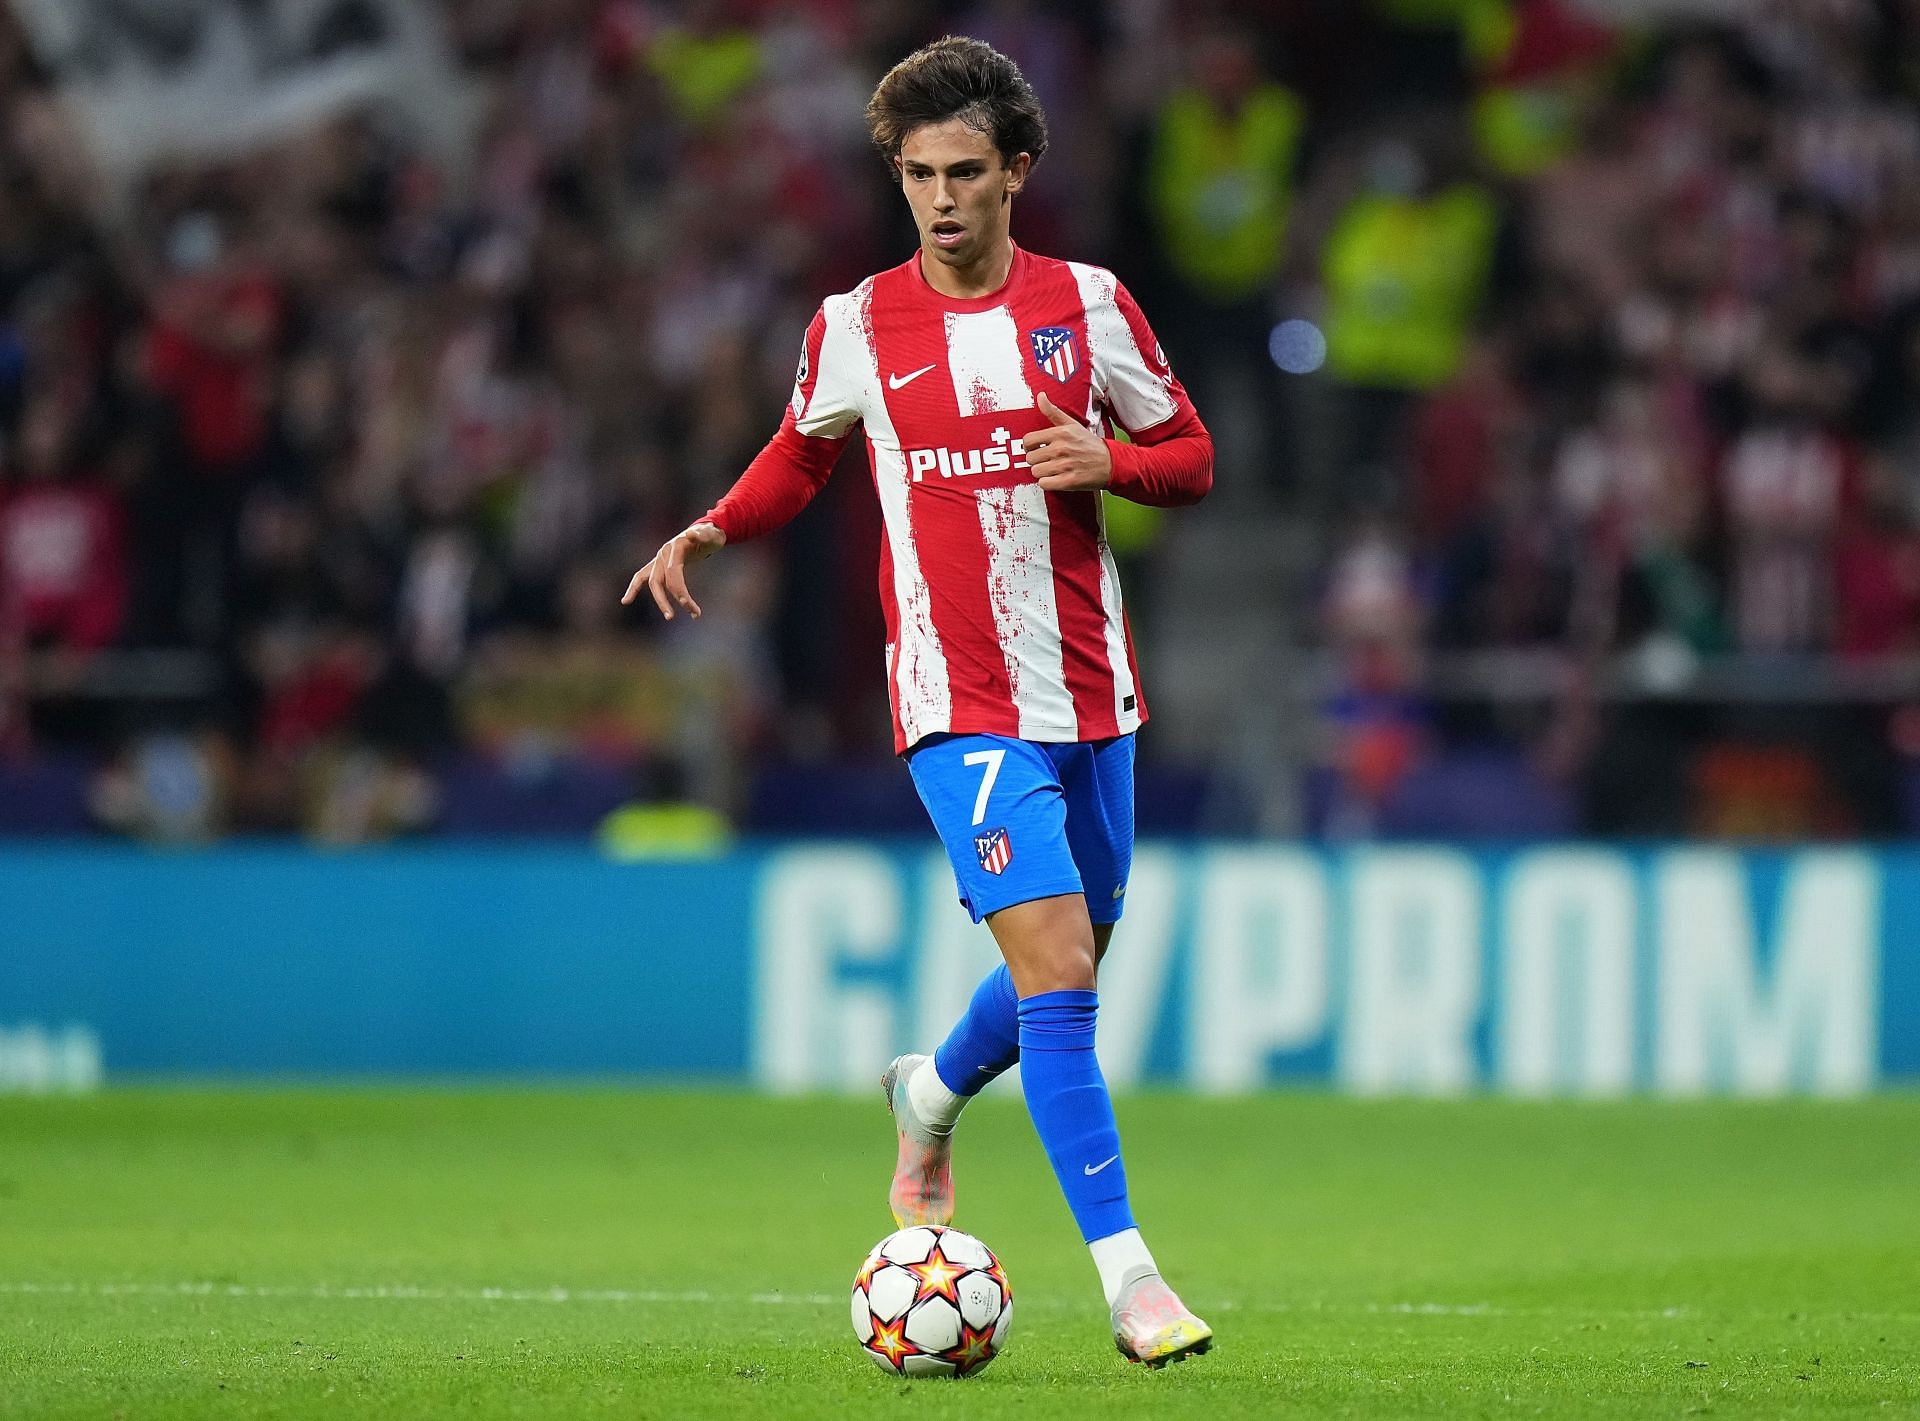 Joao Felix is one of the best young players in the game